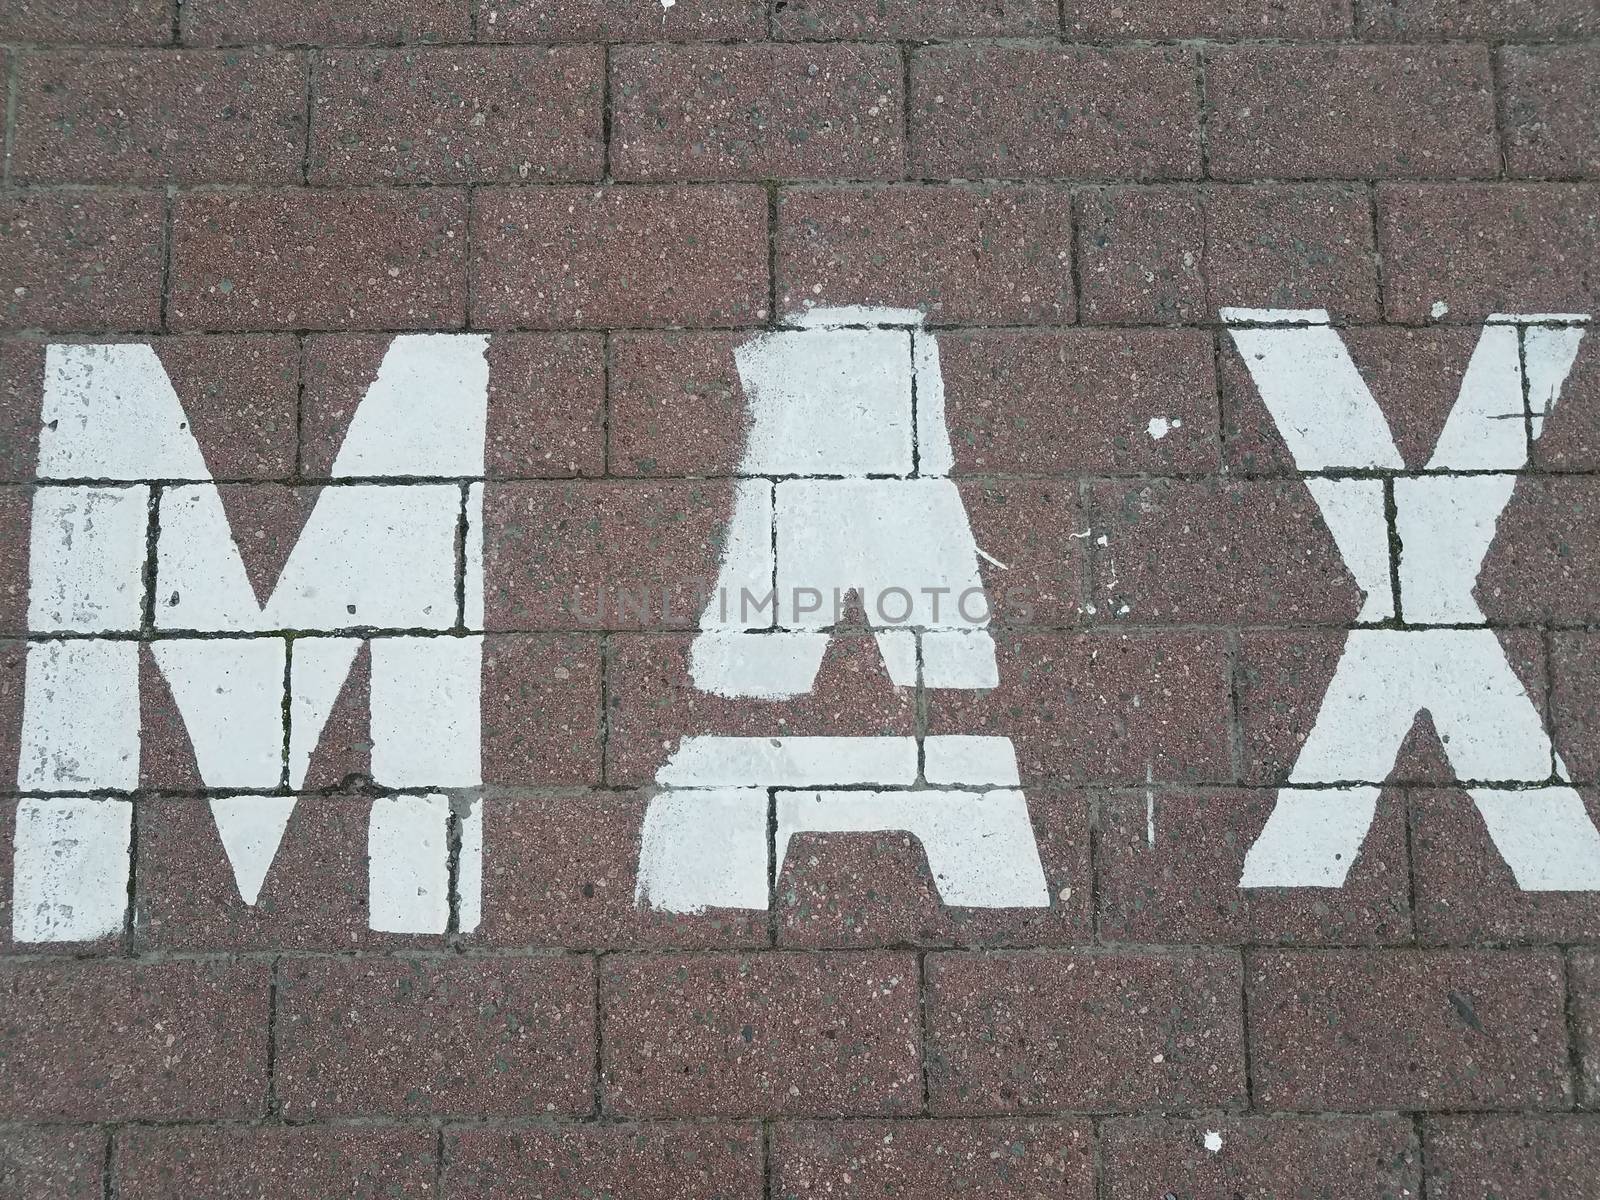 white painted max on bricks or tiles on ground or floor